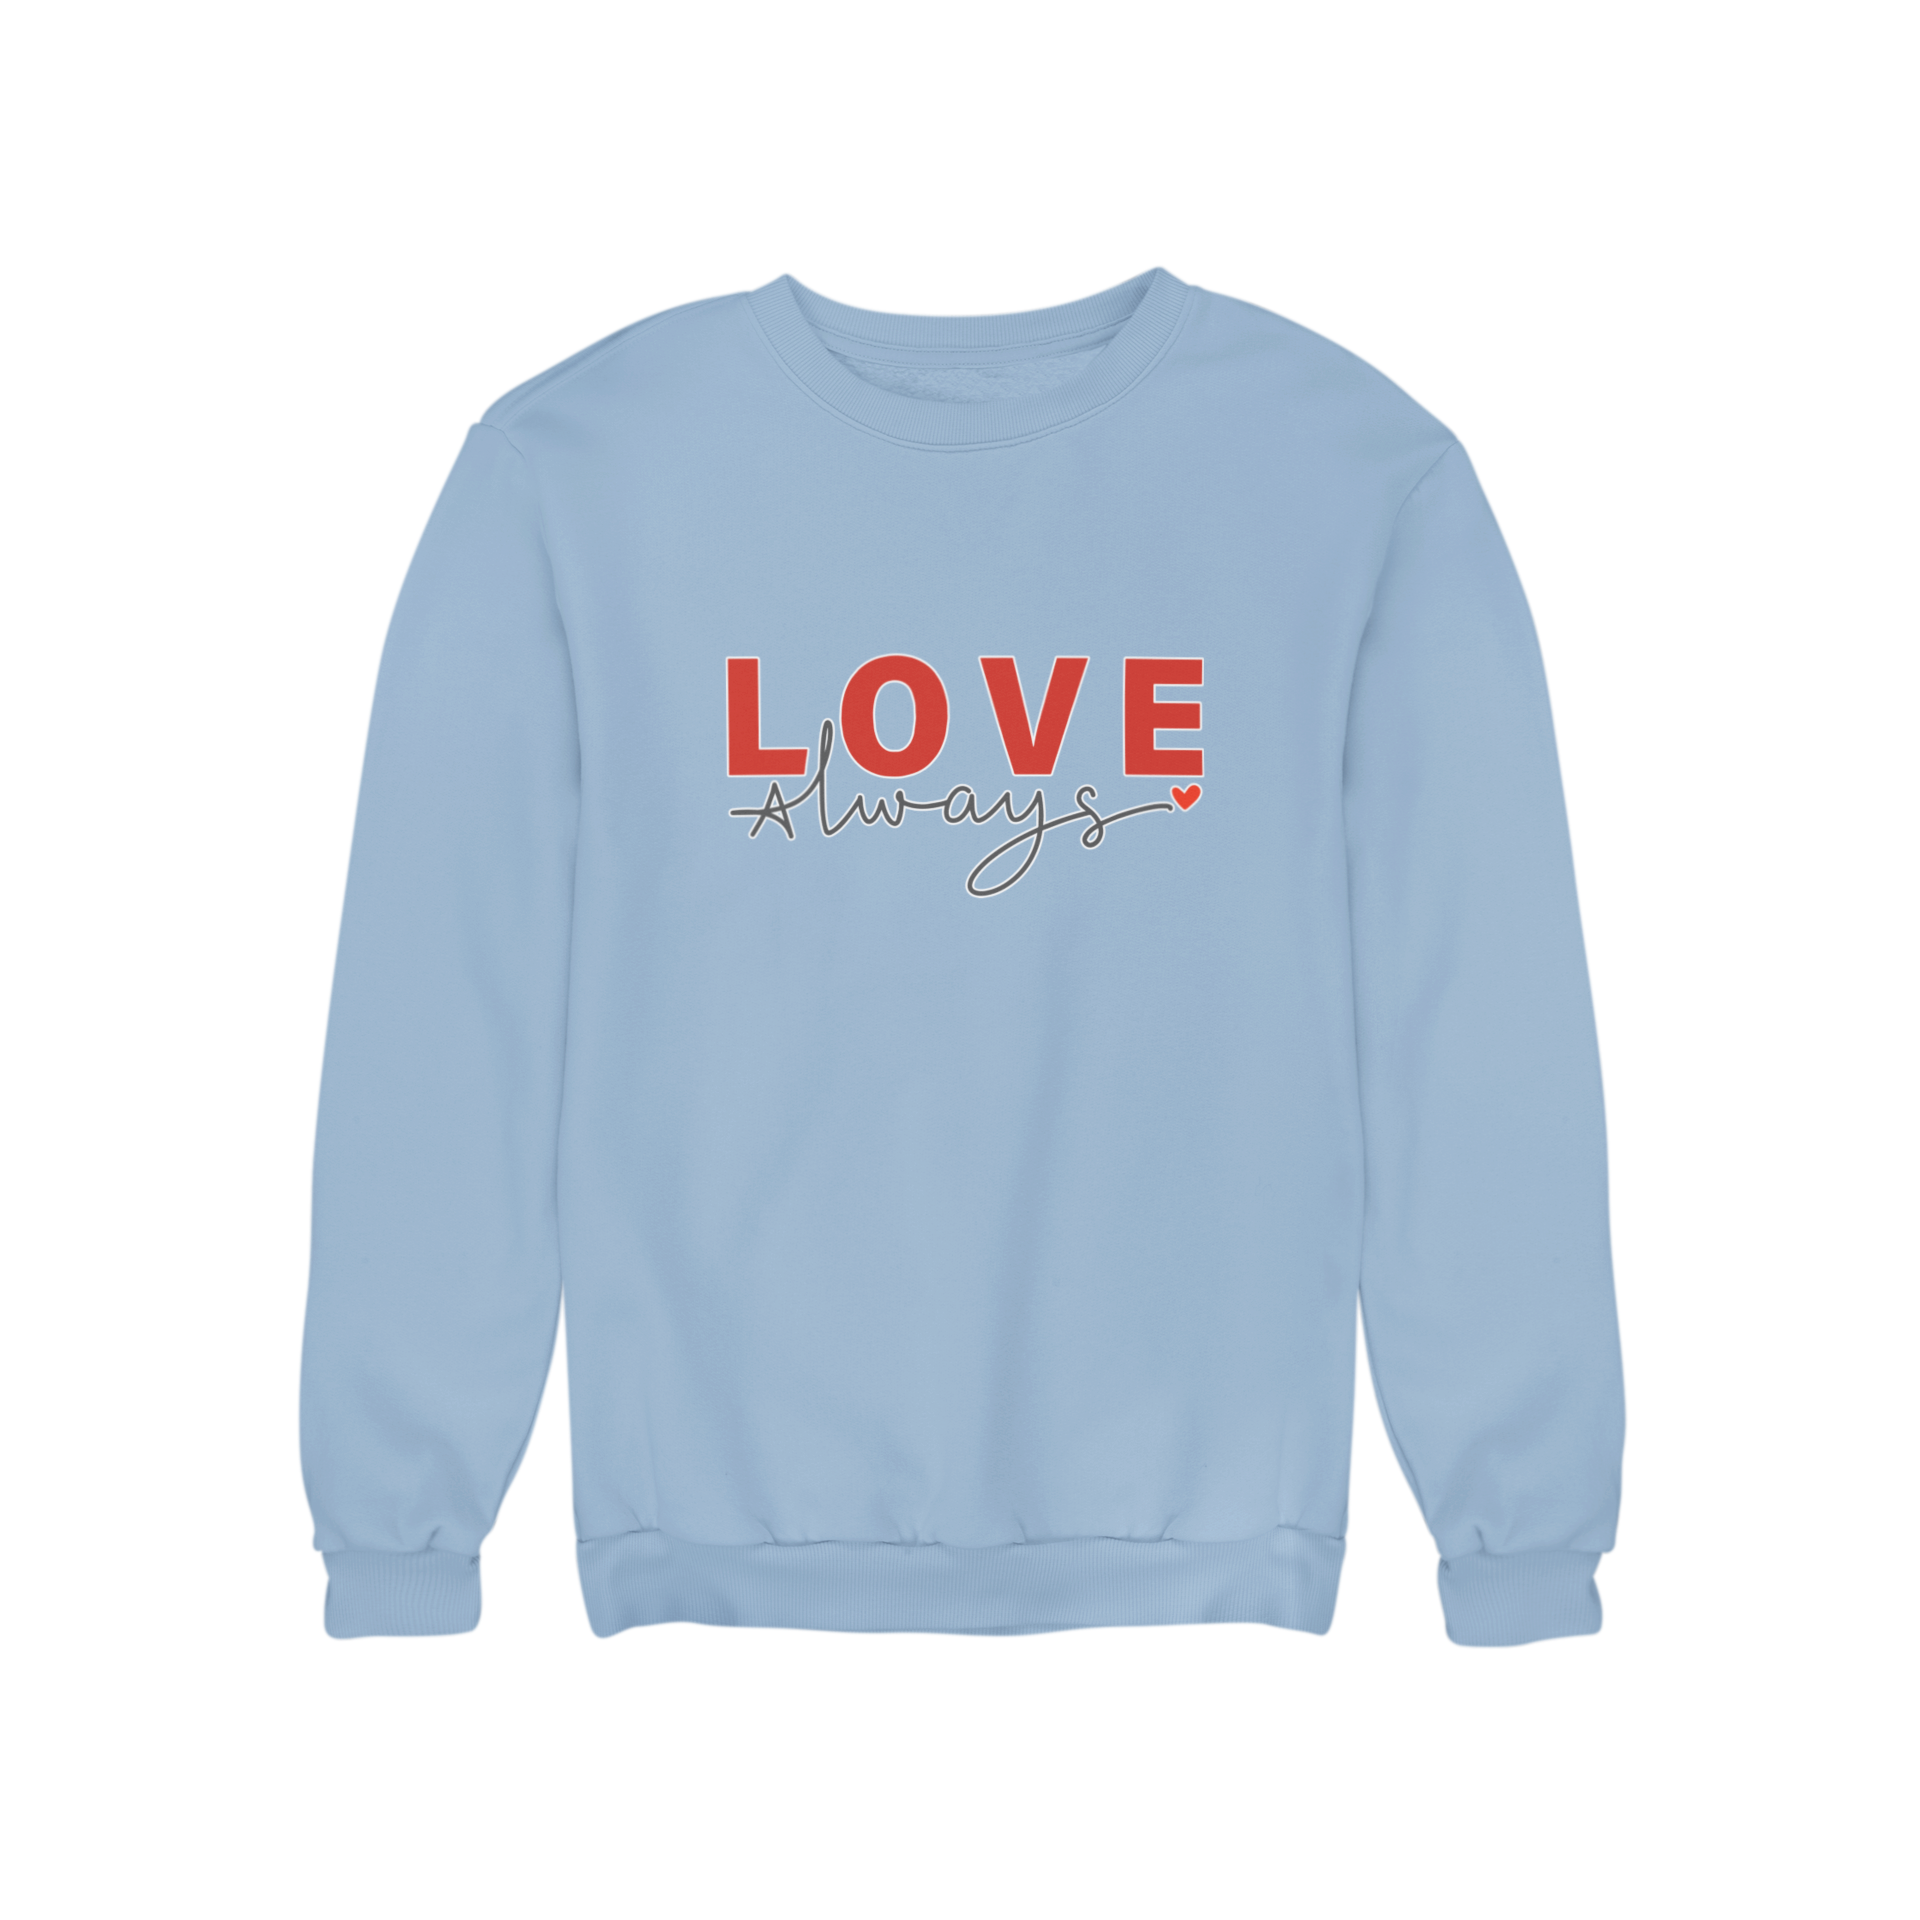 Looking for a comfortable, warm sweatshirt? Teevolution has the perfect solution for you with the slogan "Love Always." This sweatshirt is an ideal gift for your mum or even for yourself. Don't hesitate, get your hands on one today!